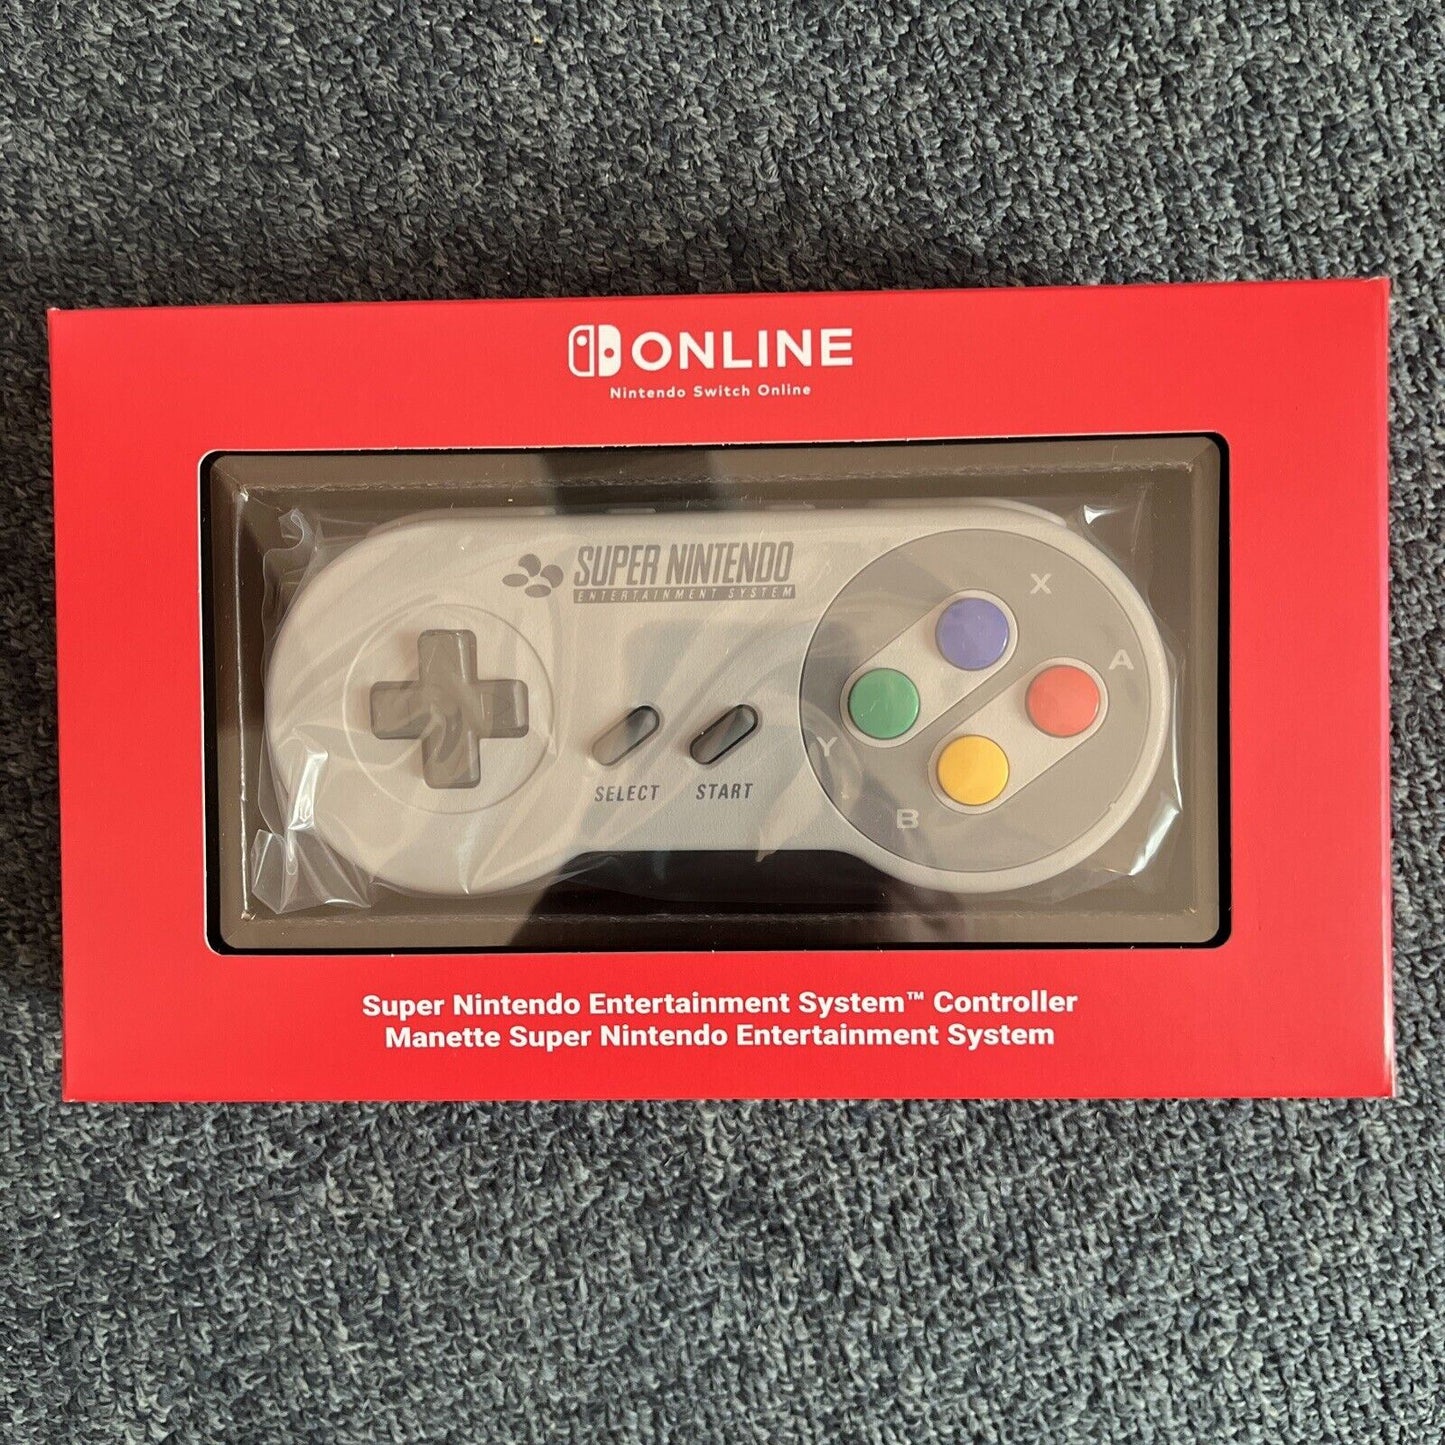 *New* Super Nintendo Entertainment System Controller For Nintendo Switch